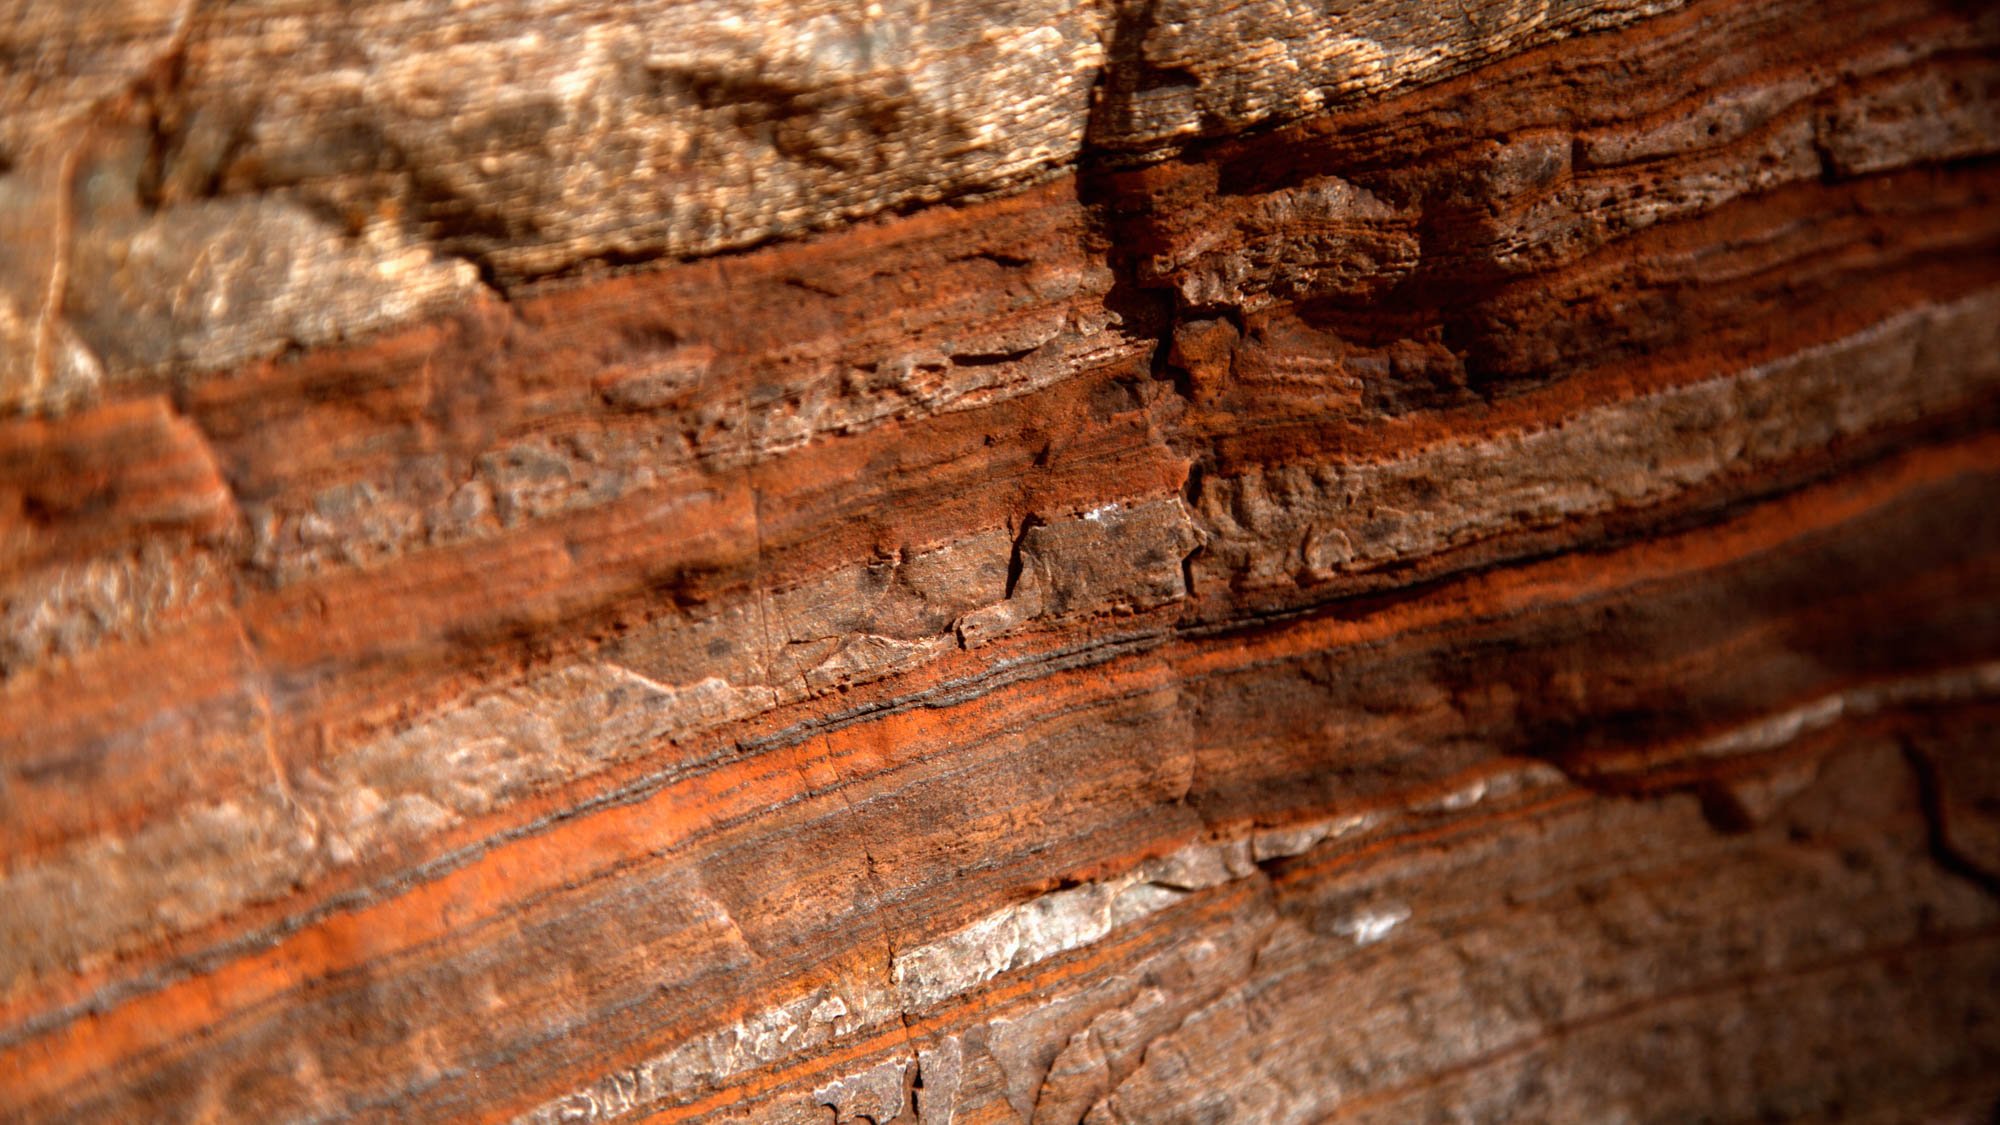 Layers of rock in a mine excavation